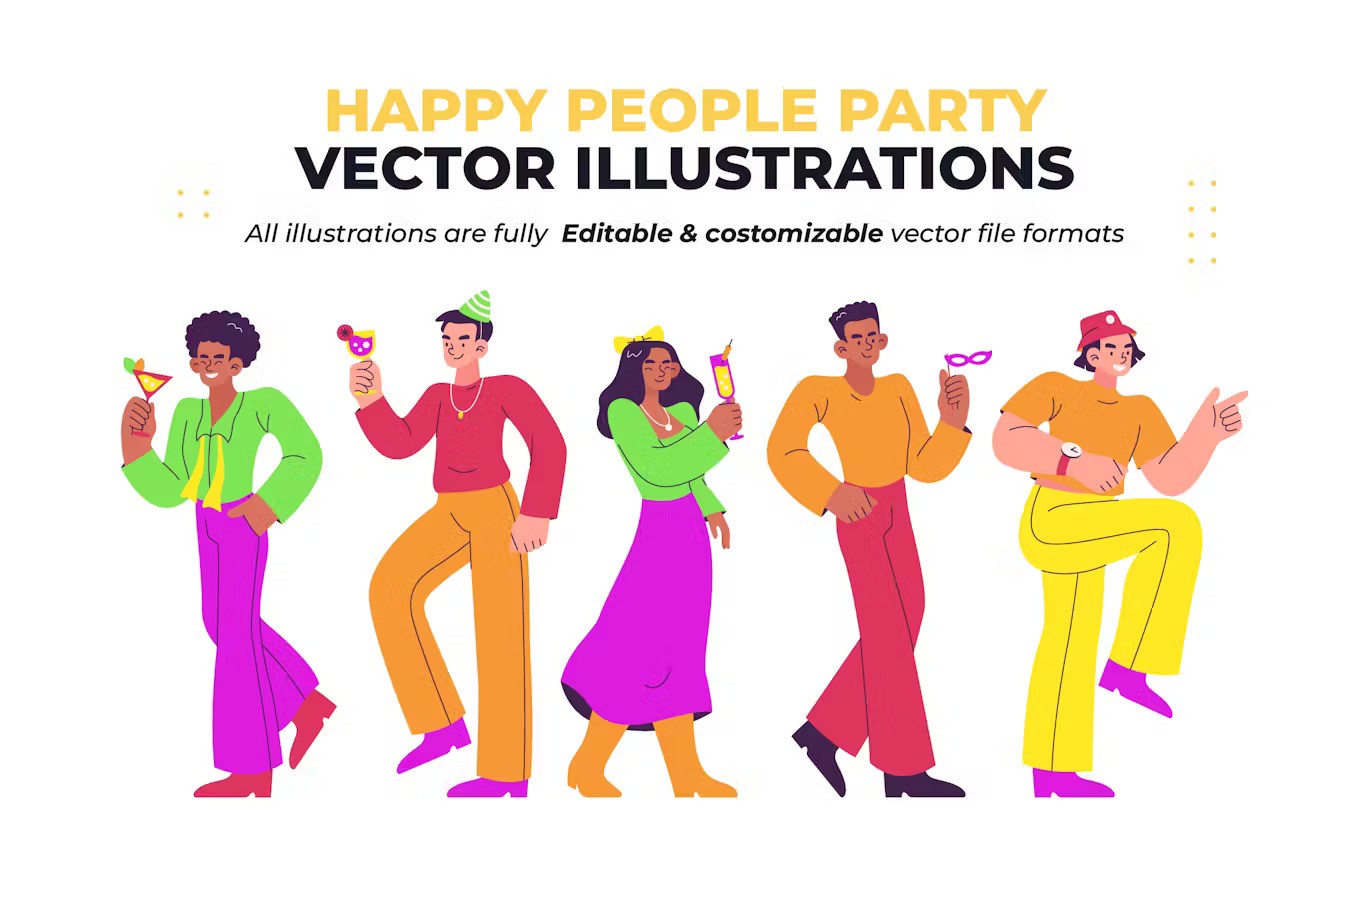 30 Images Happy People Party Illustrations-4.jpg